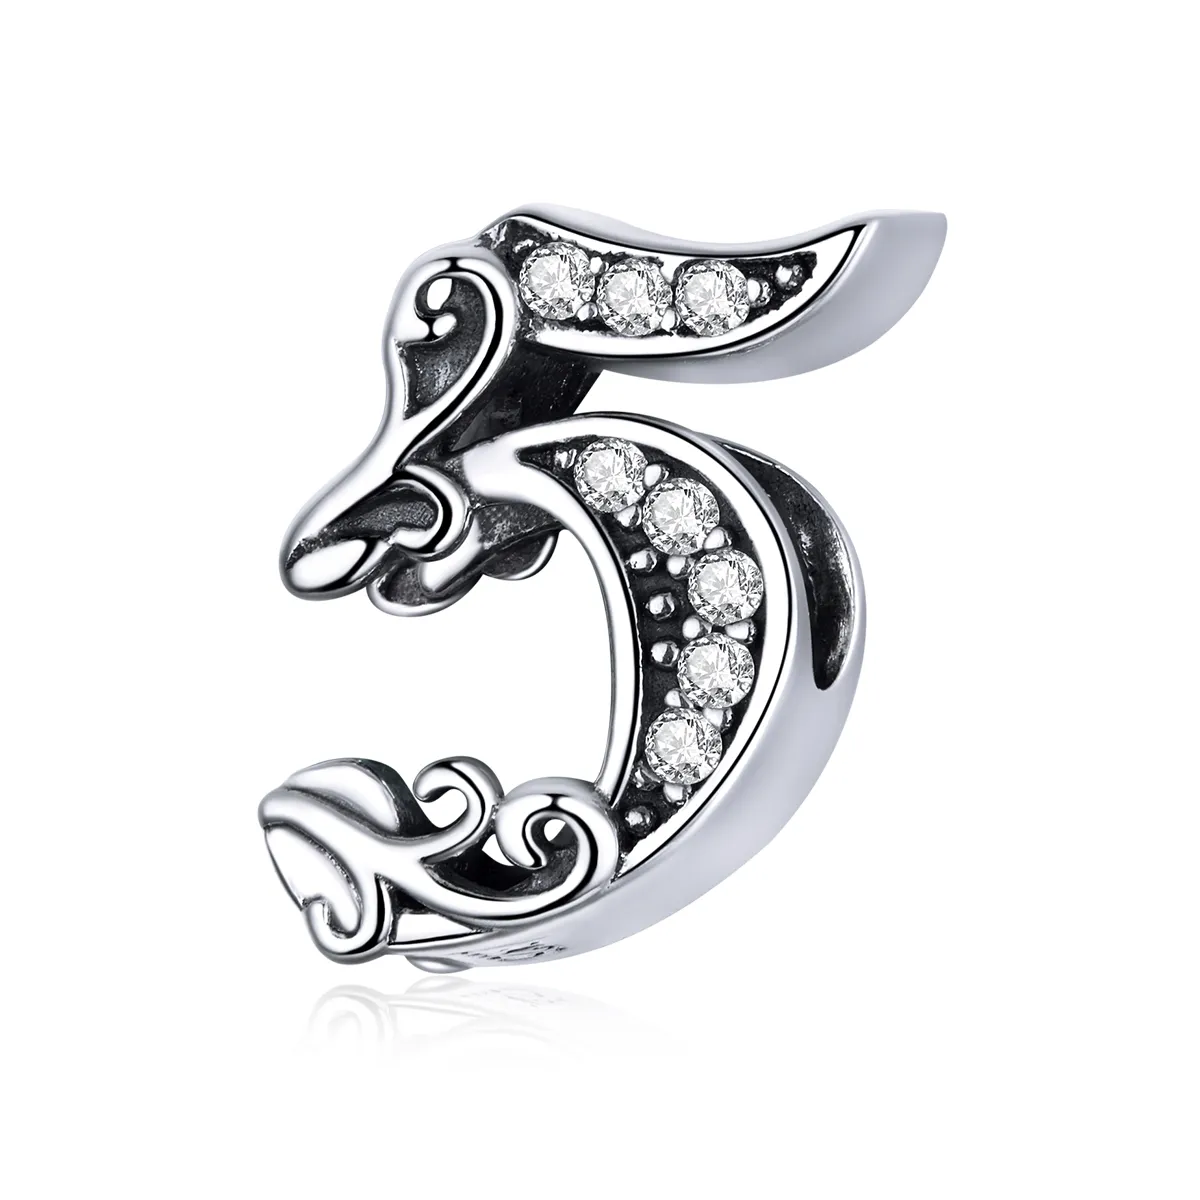 Pandora Style Silver Number 5 Charm - SCC1418-5